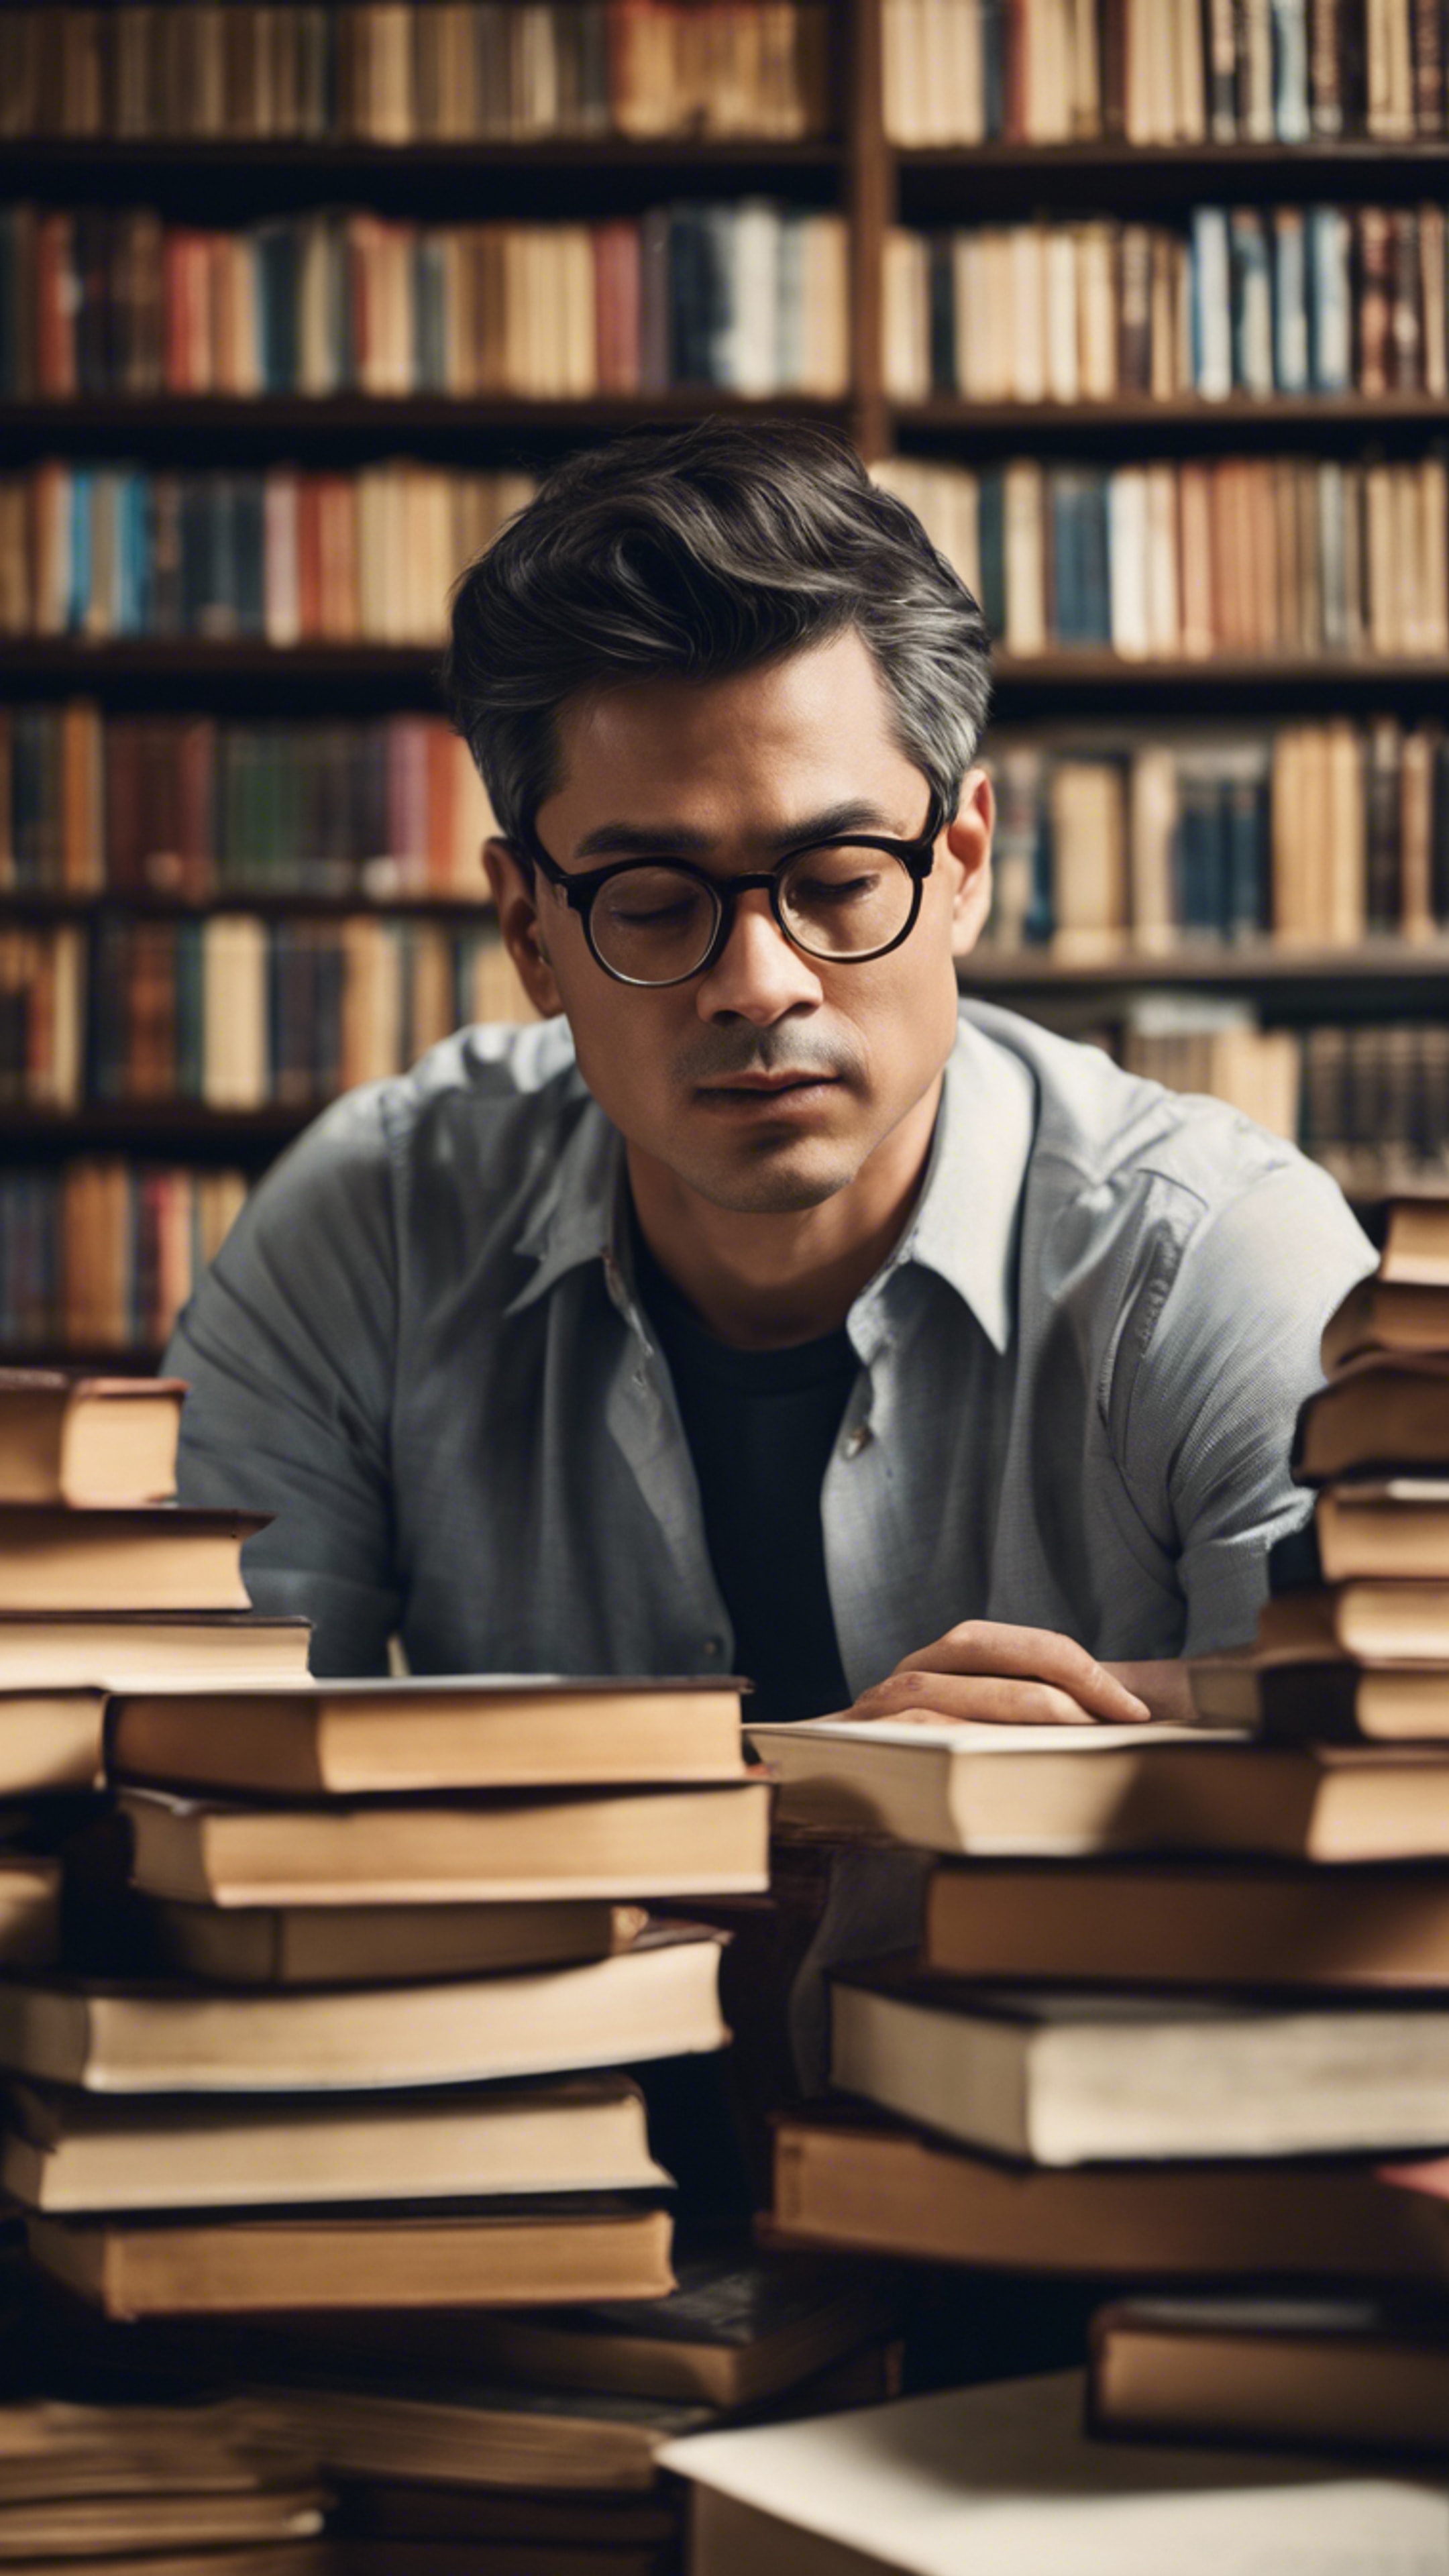 An intelligent man in glasses, deeply engrossed in his studies surrounded by stacks of books in a quiet library. Дэлгэцийн зураг[88f4531613da45079a41]